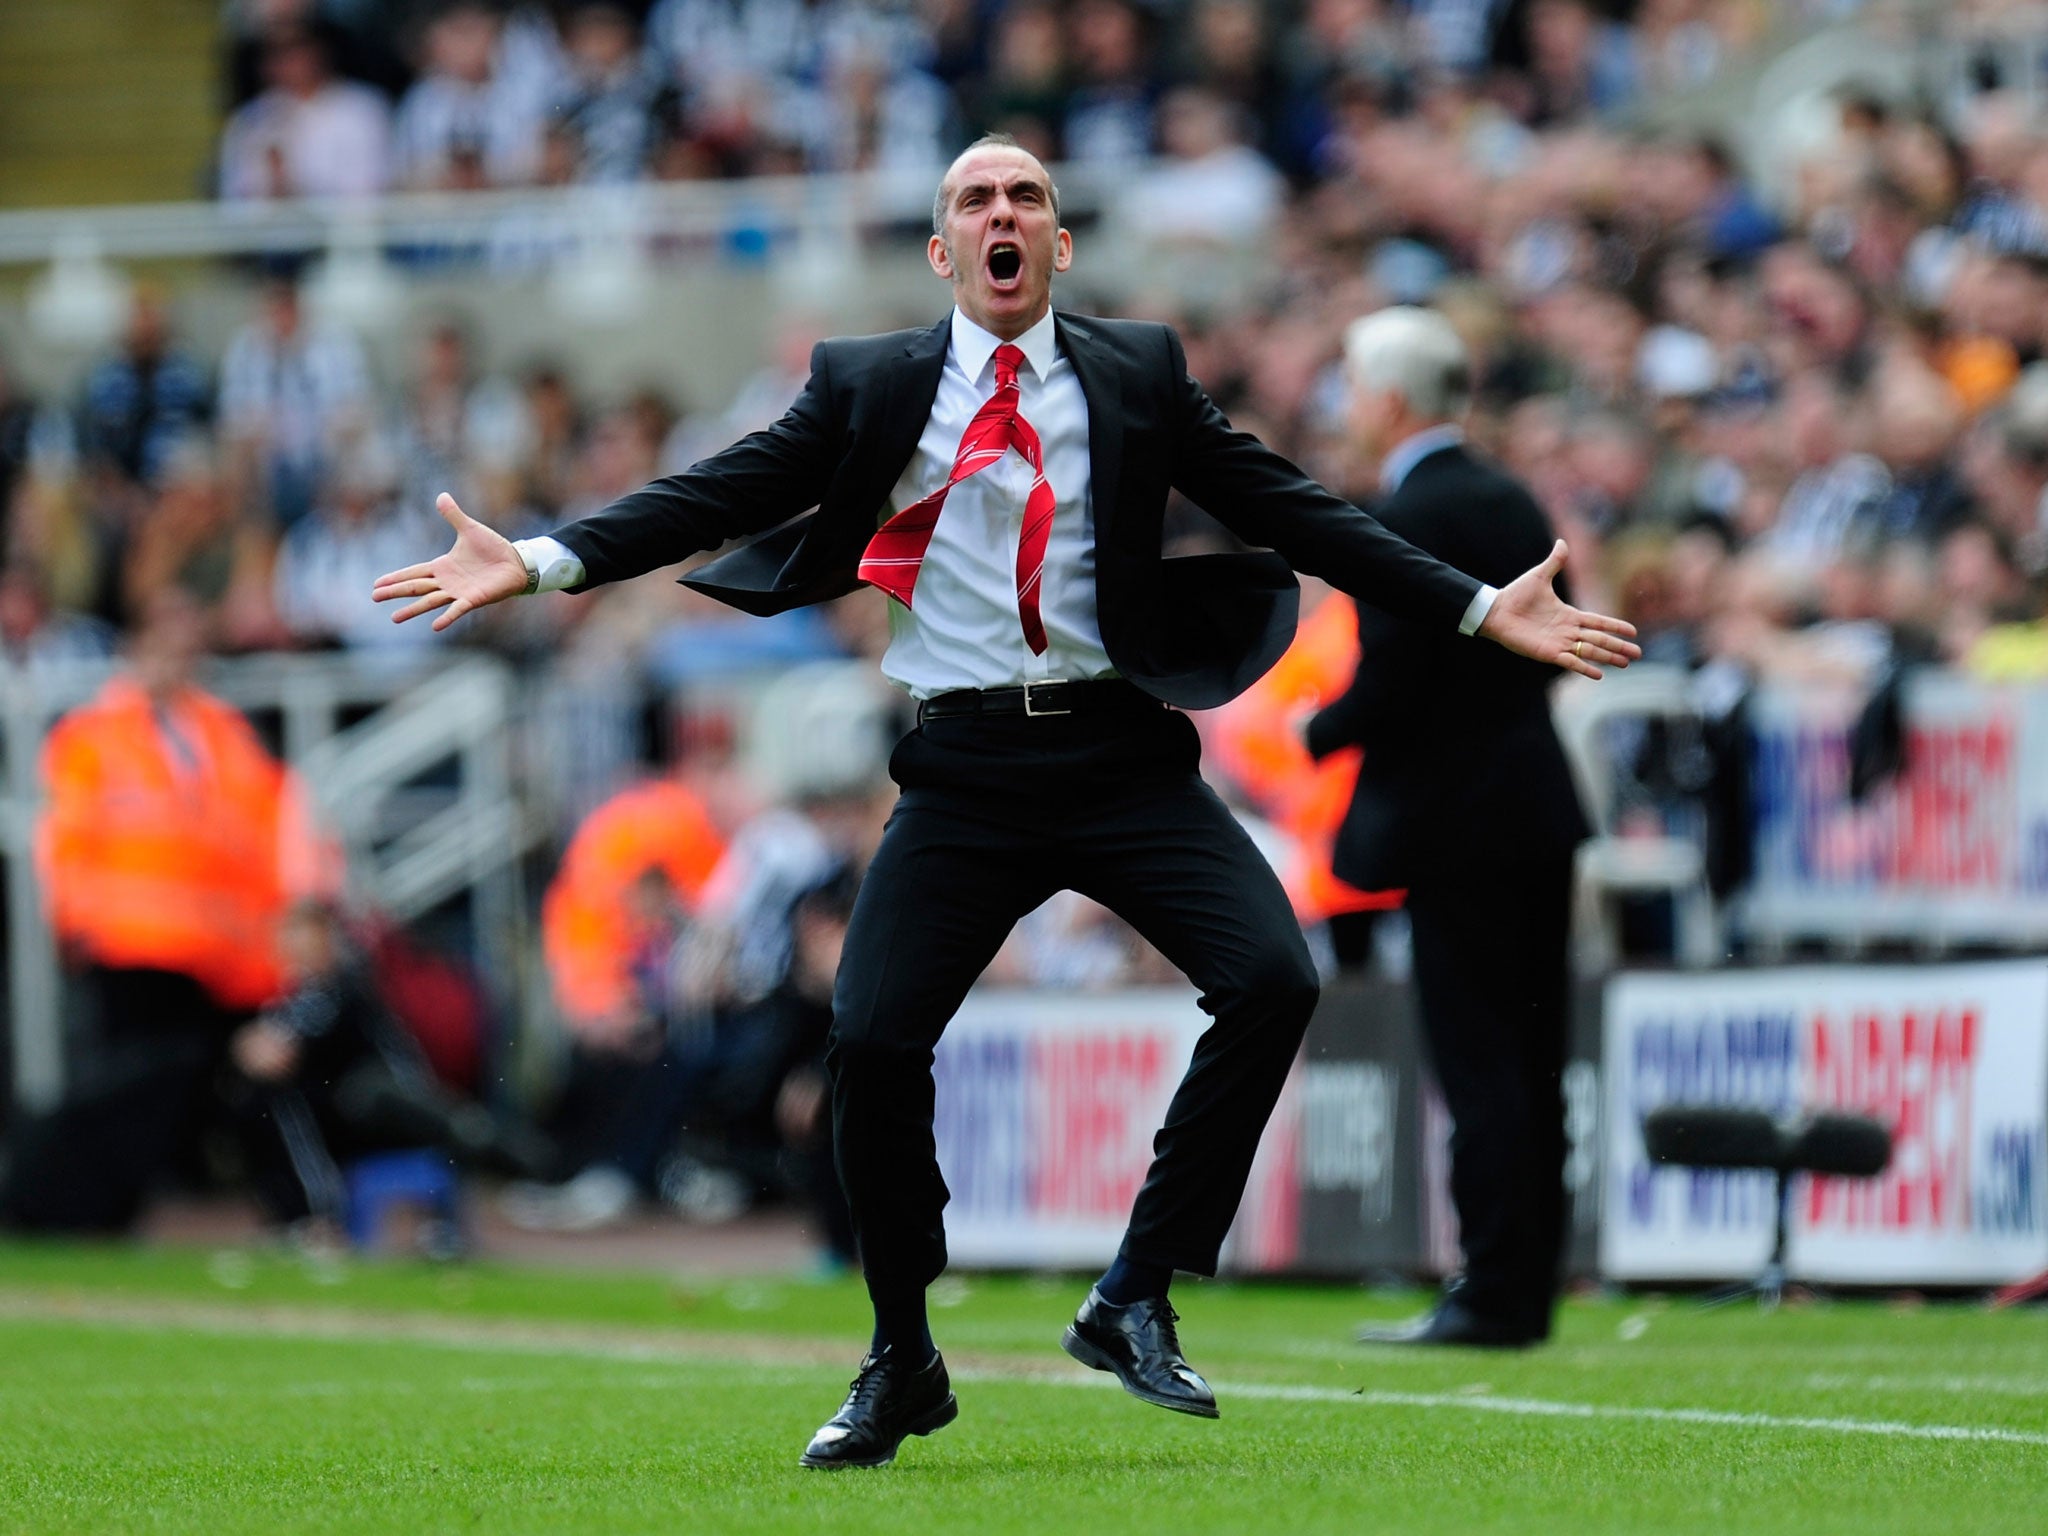 Di Canio dropped to his knees in celebration on the sidelines when Johnson's 74th-minute effort hit the back of the net, and it was the travelling fans among a crowd of 52,355 making all the noise as Sunderland won at St James' Park for the first time sin